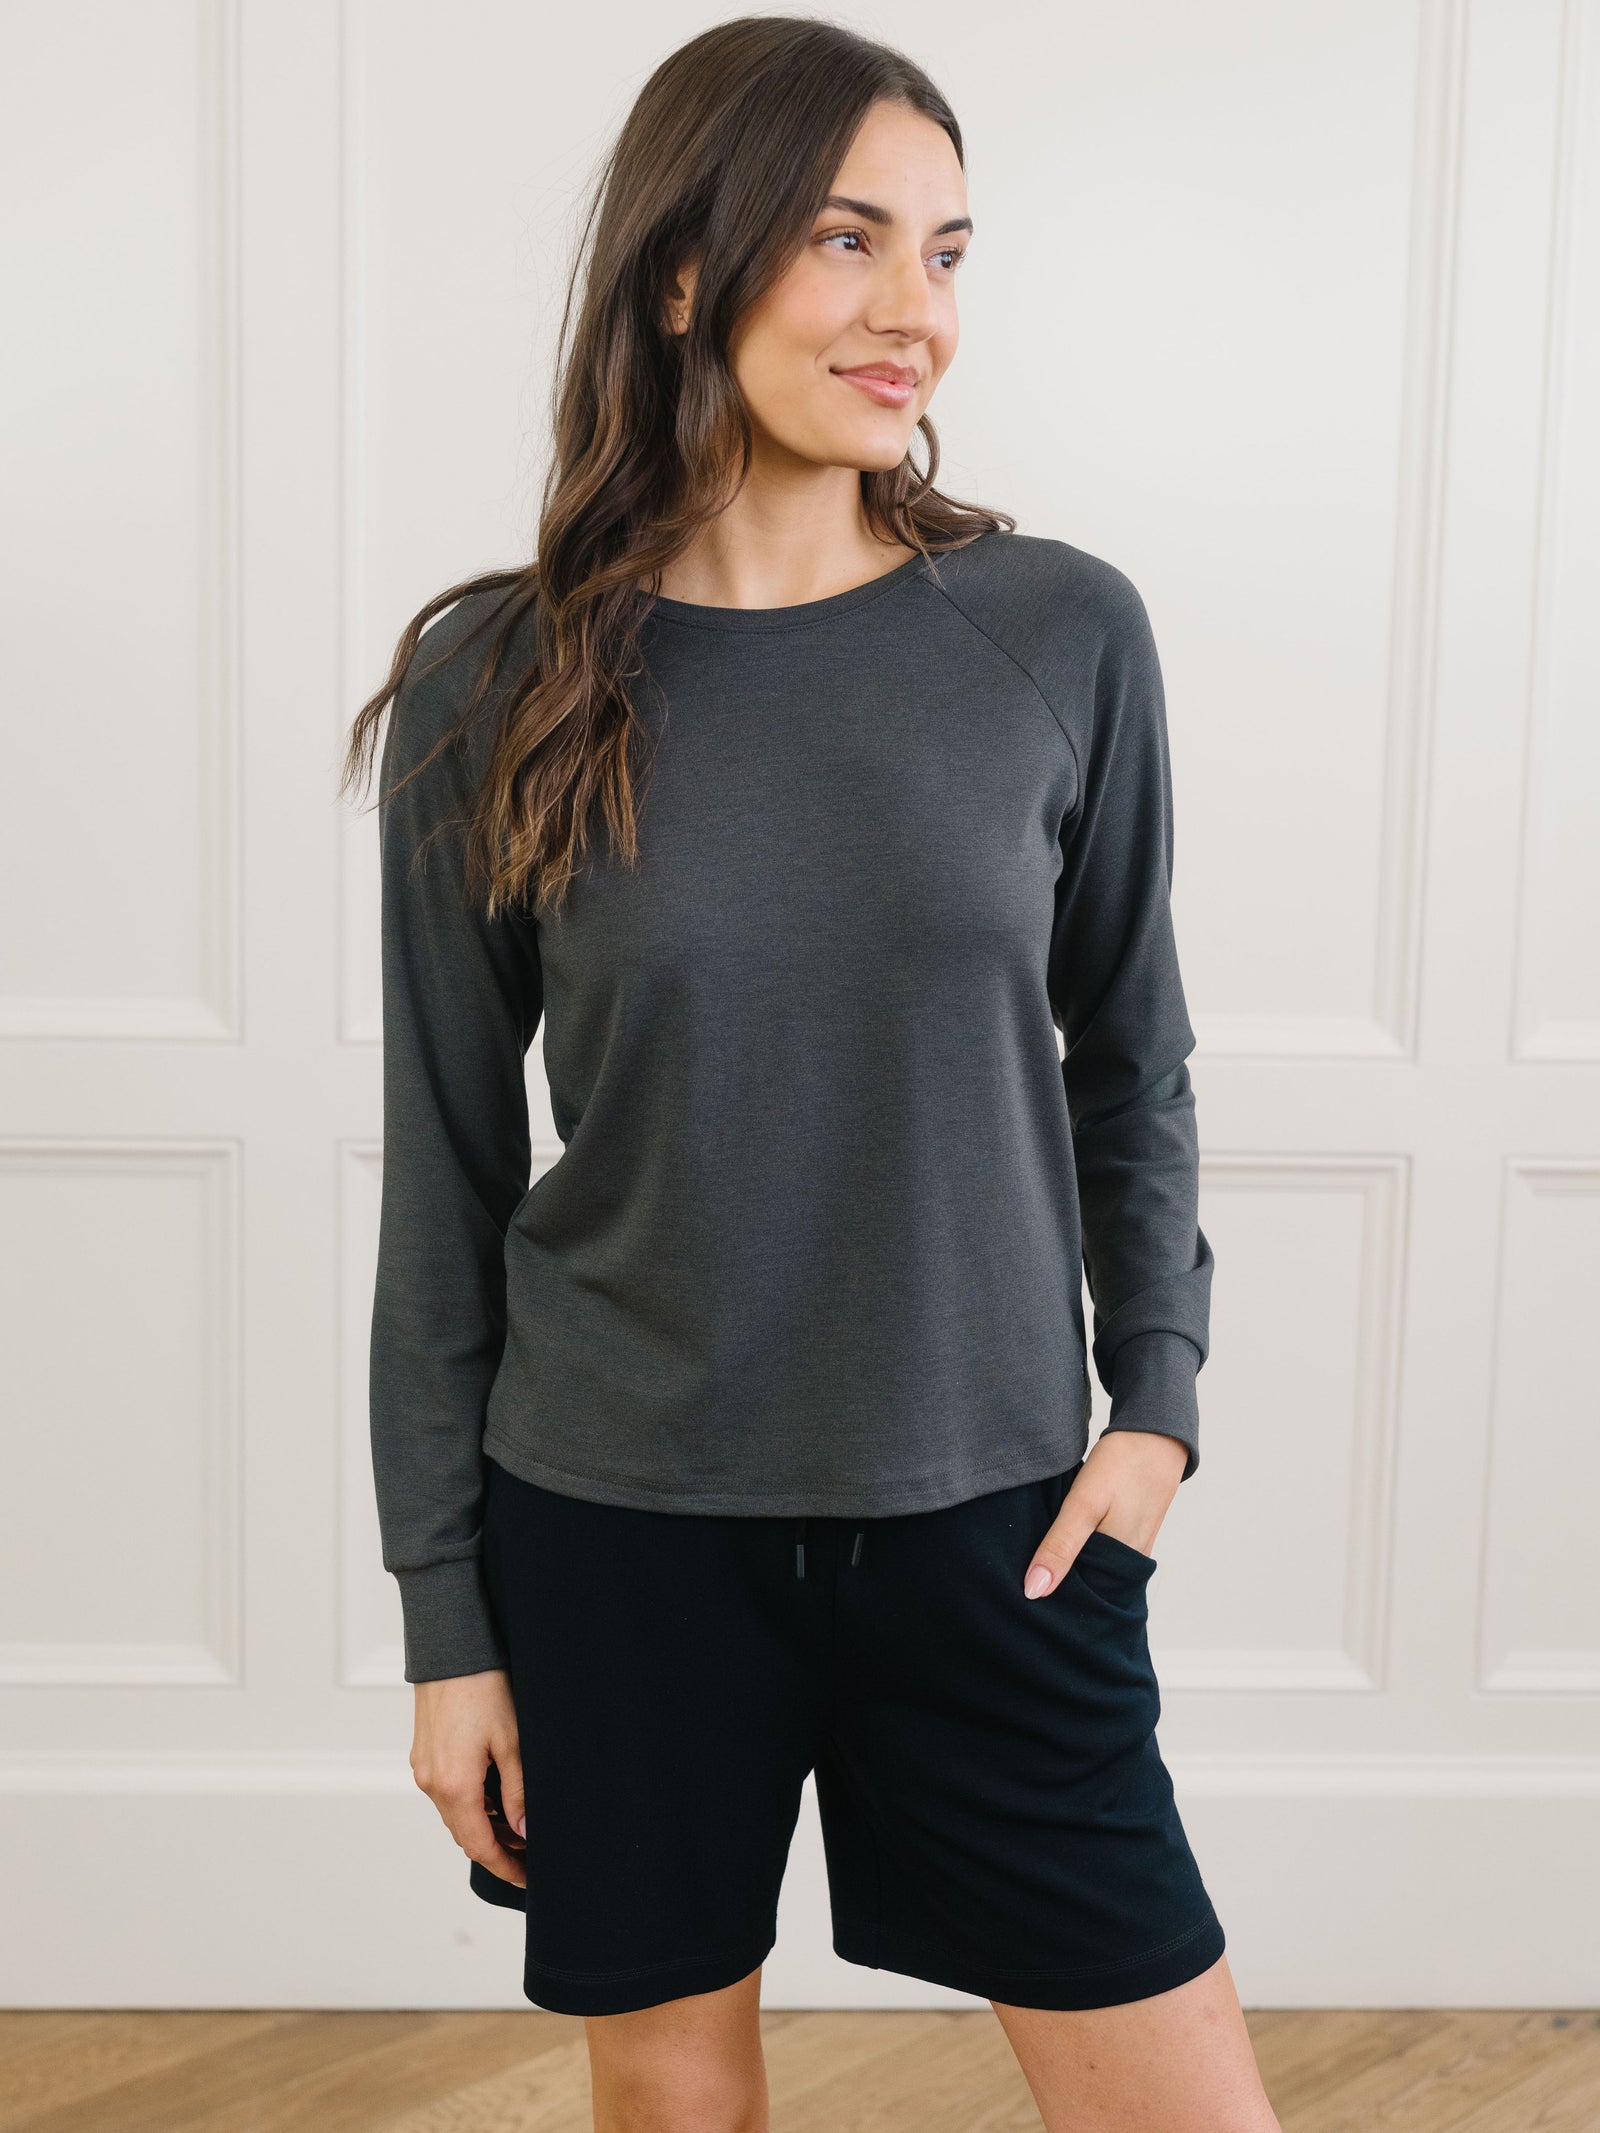 Women's Ultra-Soft Bamboo Pullover Crew Top - Cozy Earth